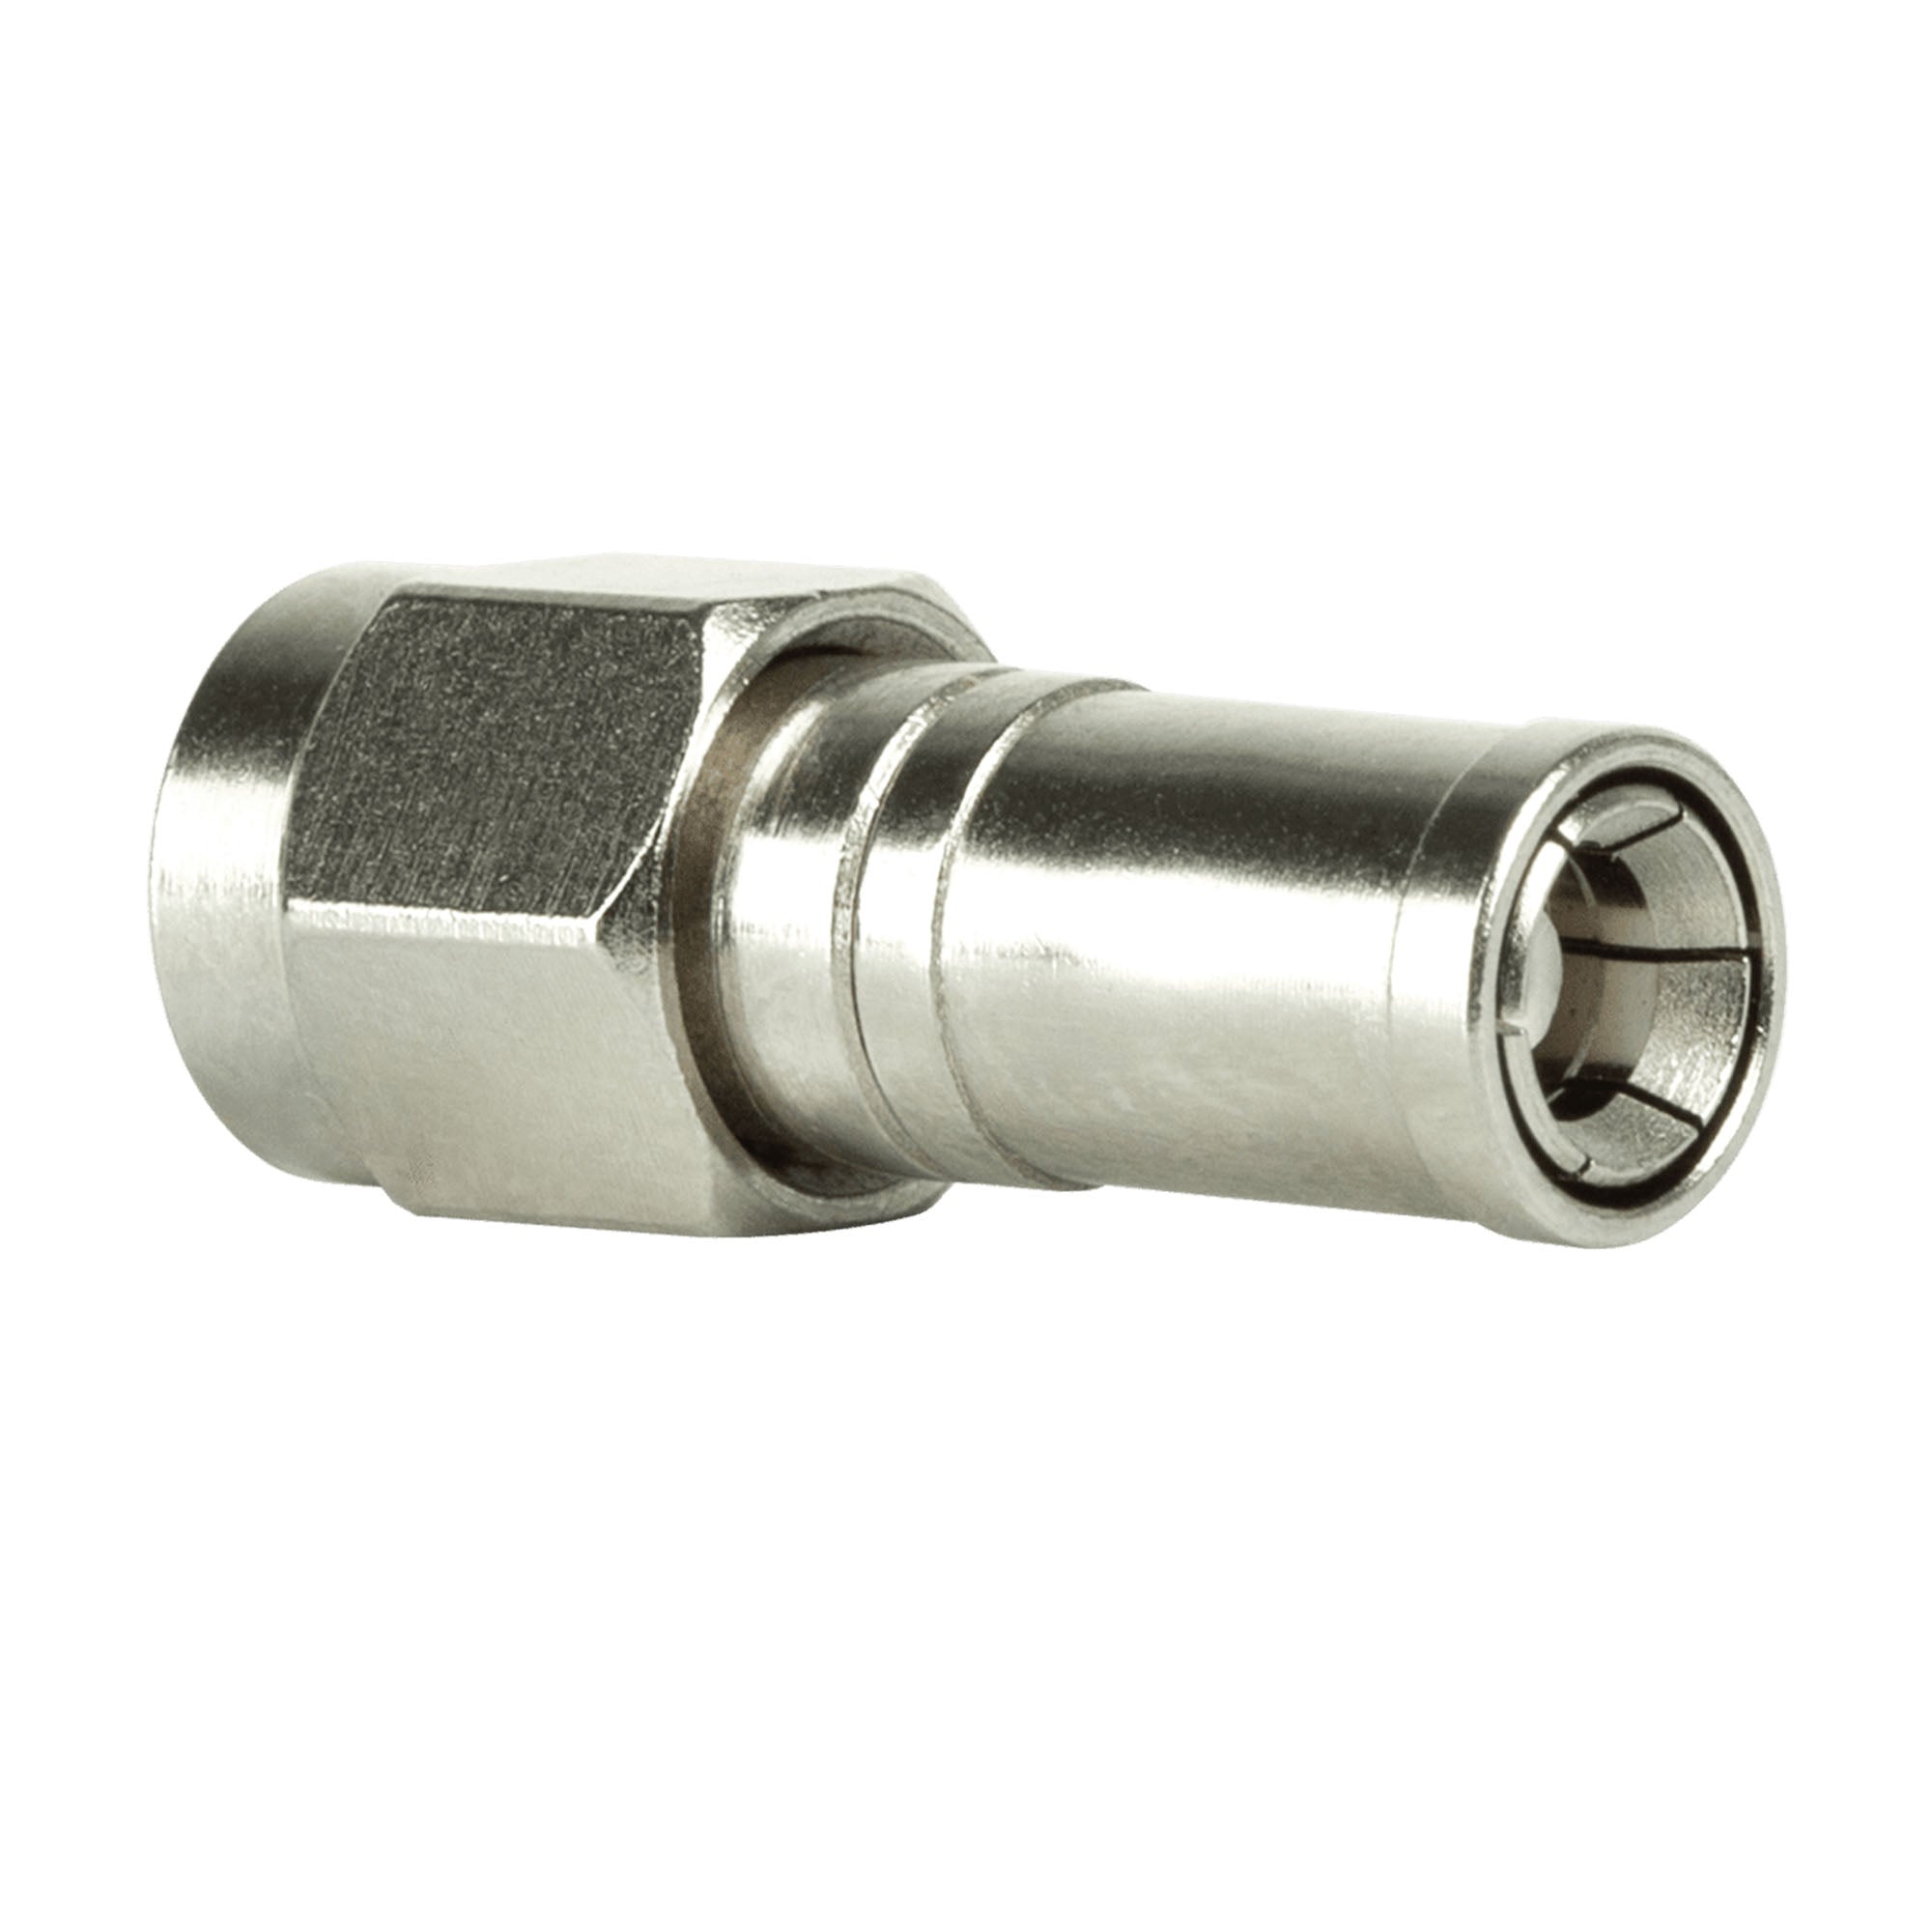 WeBoost SMB Plug to SMA Male Connector - 15-04700